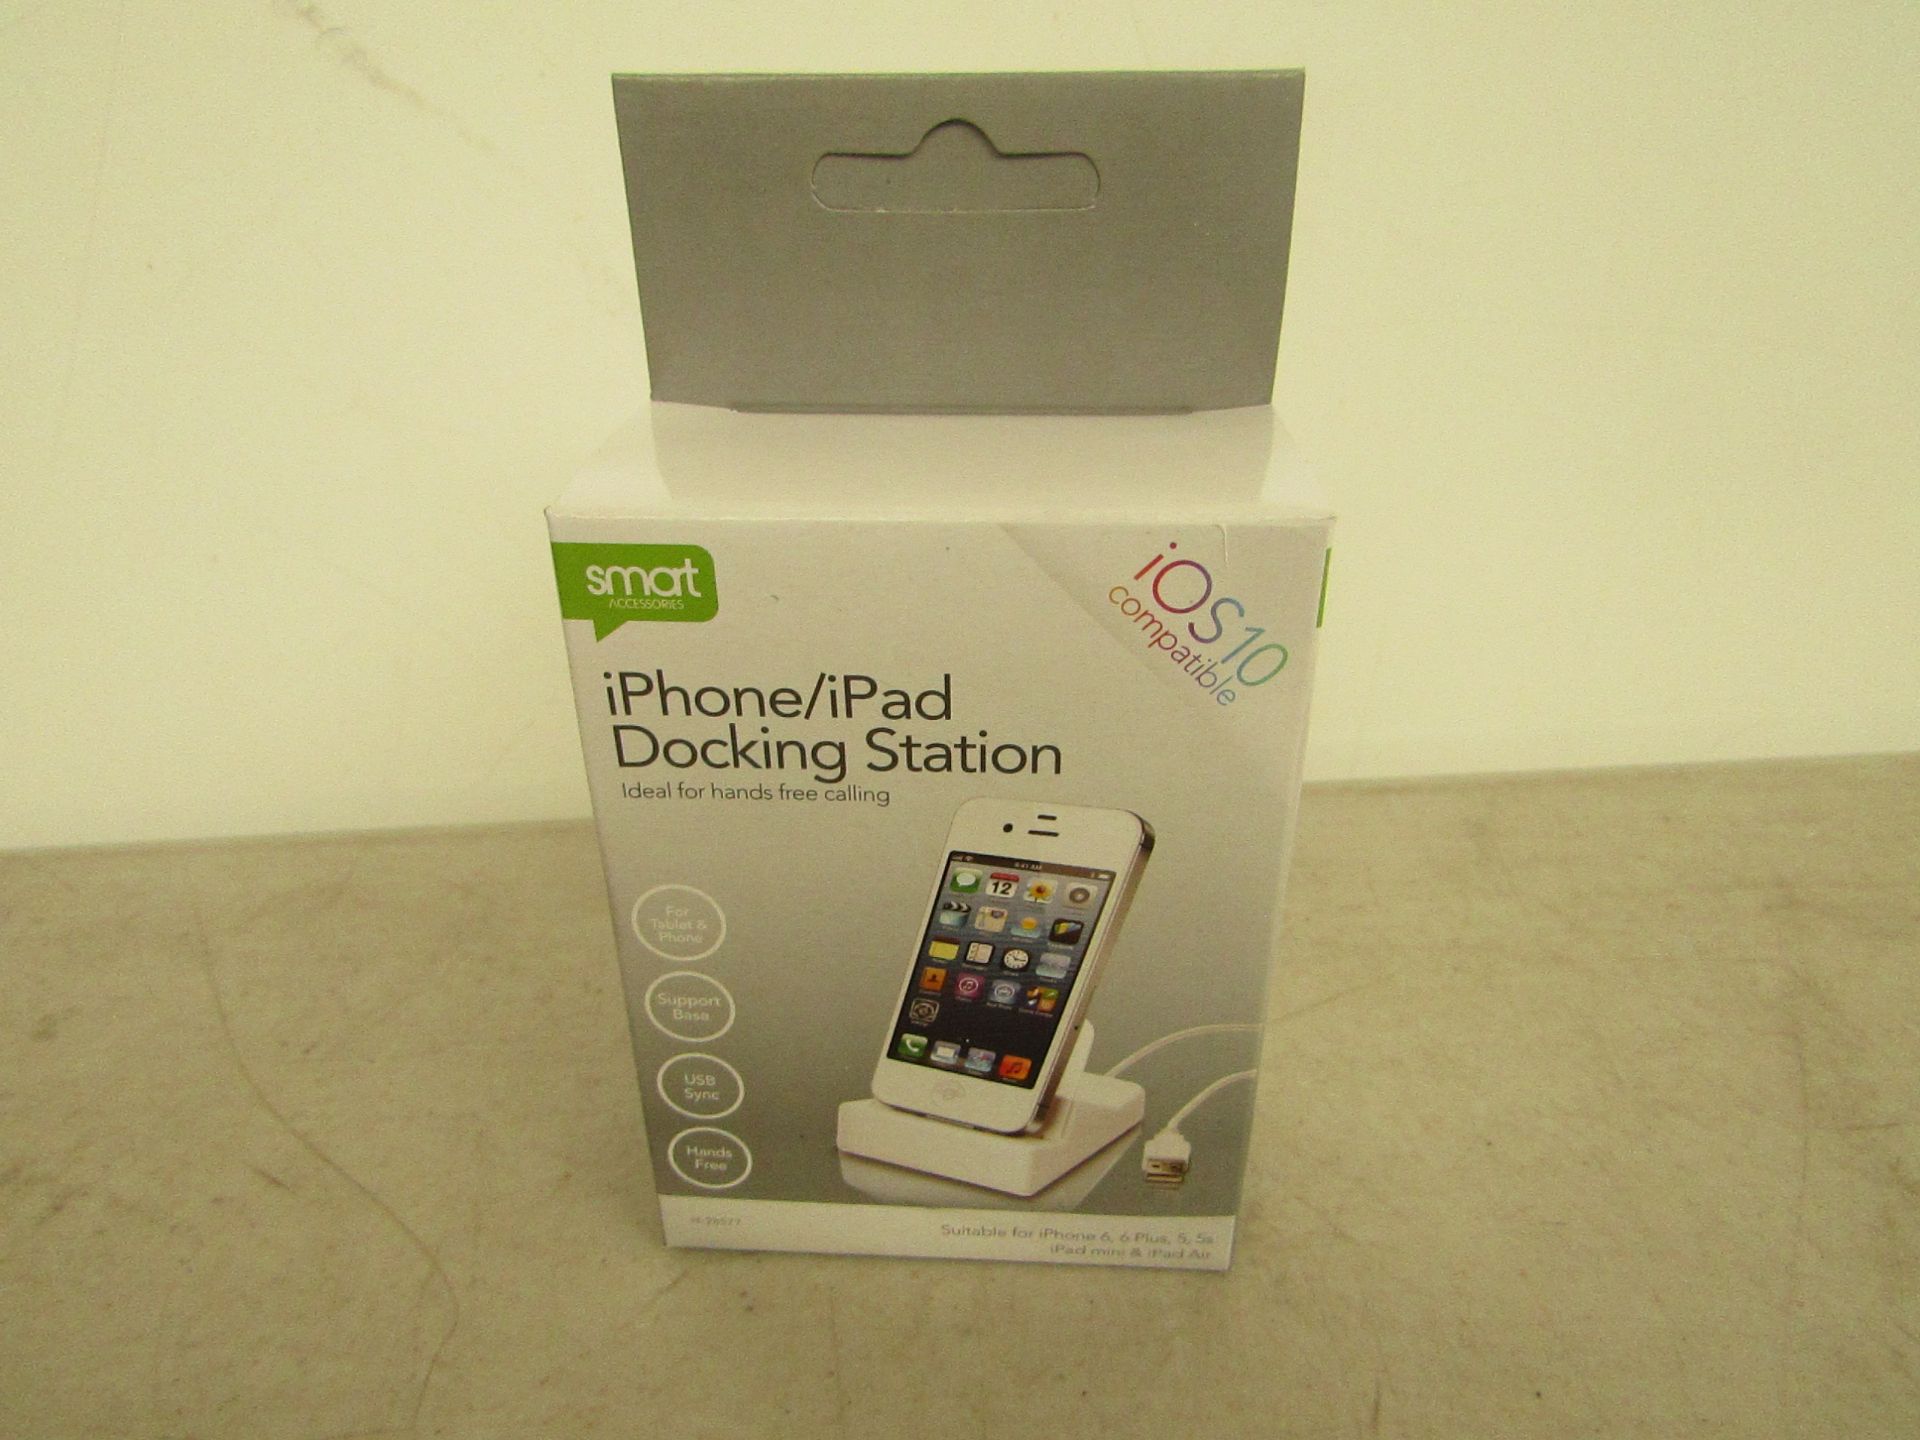 6x Smart iPhone/iPad docking station, all new and boxed.